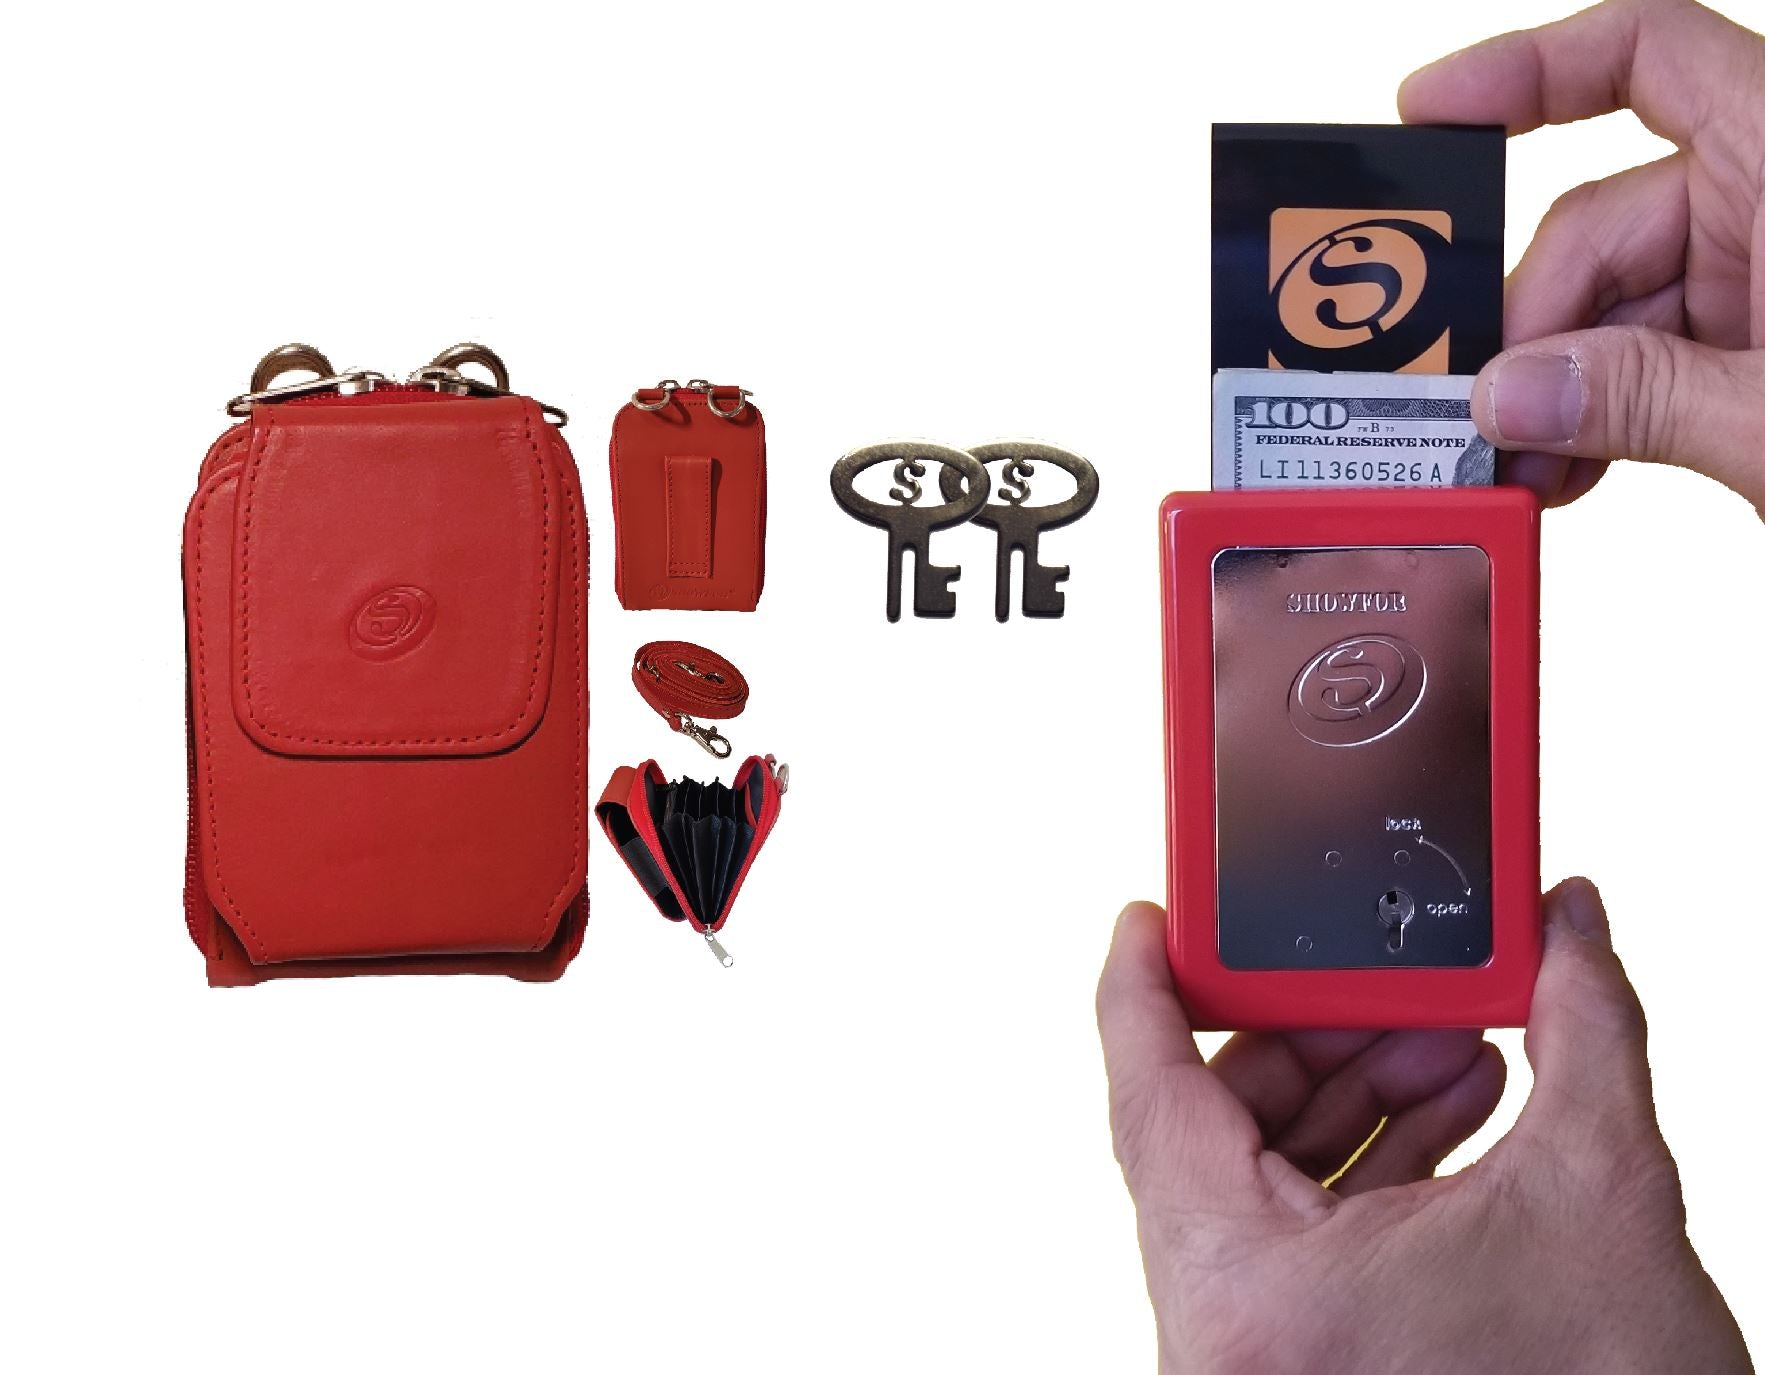 The Showfor Red Winners Bank with Red Leather Case bundle, a versatile casino essential.